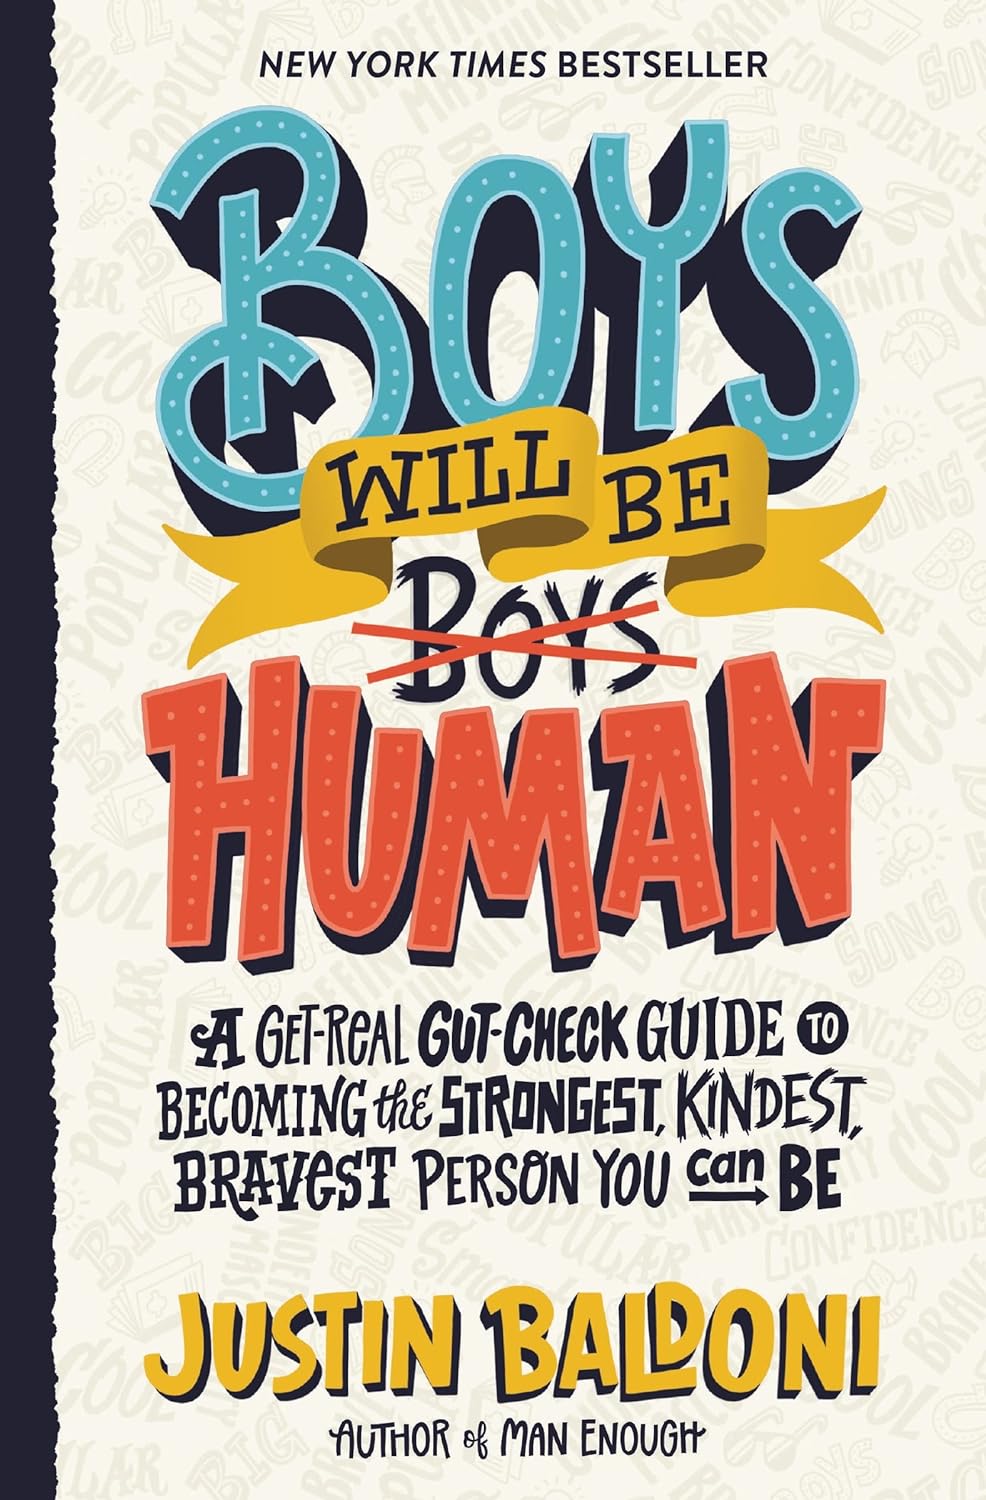 Boys Will Be Human A Get-Real Gut-Check Guide to Becoming the Strongest, Kindest, Bravest Person You Can Be - SureShot Books Publishing LLC